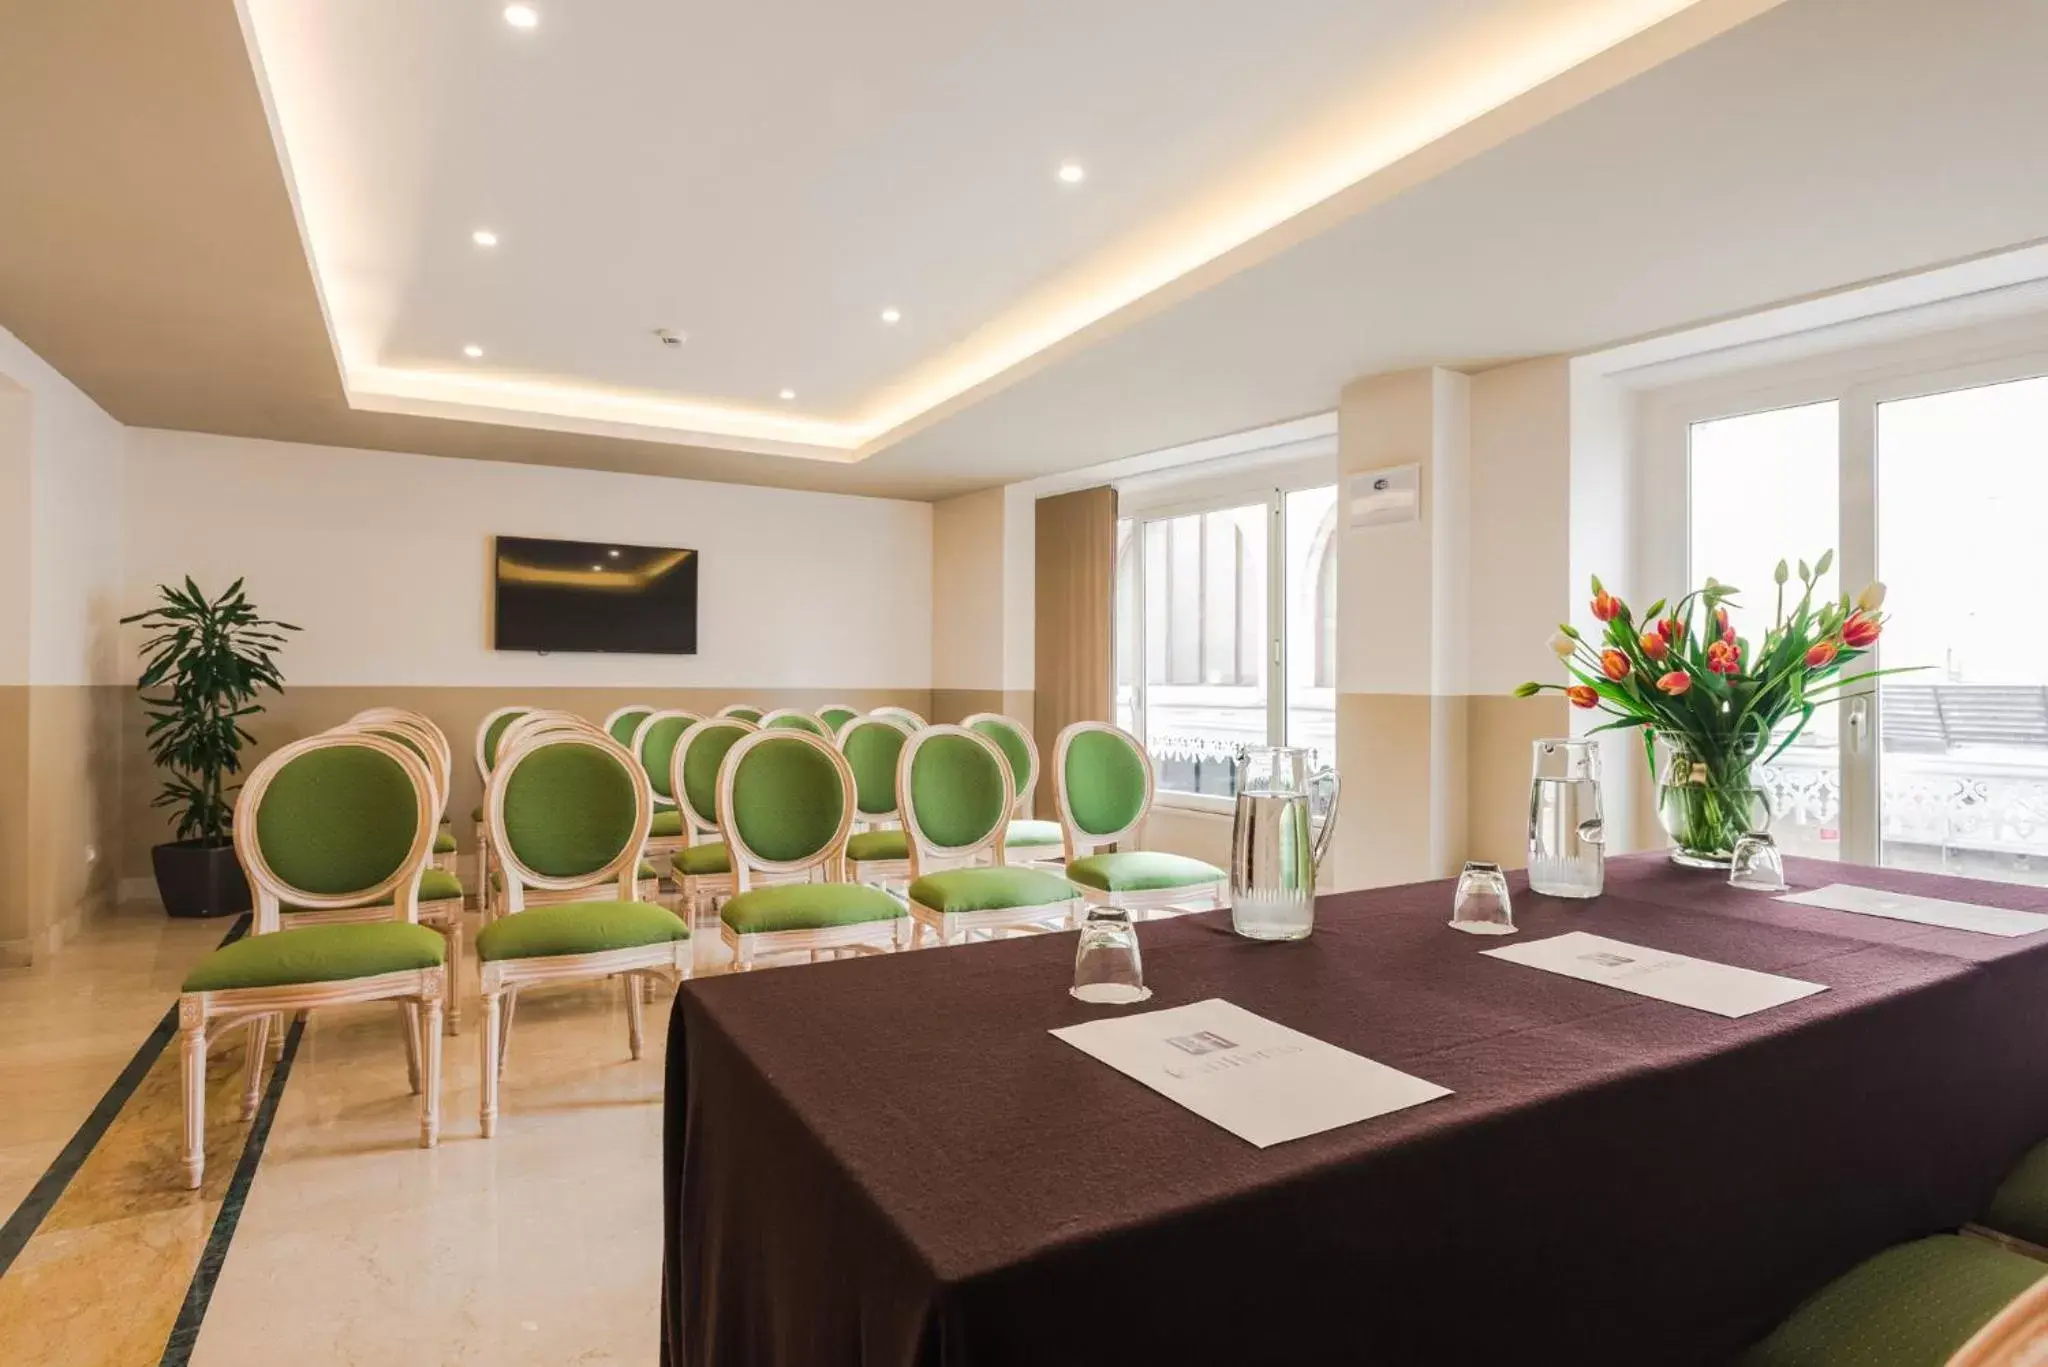 Meeting/conference room in Raeli Hotel Siracusa